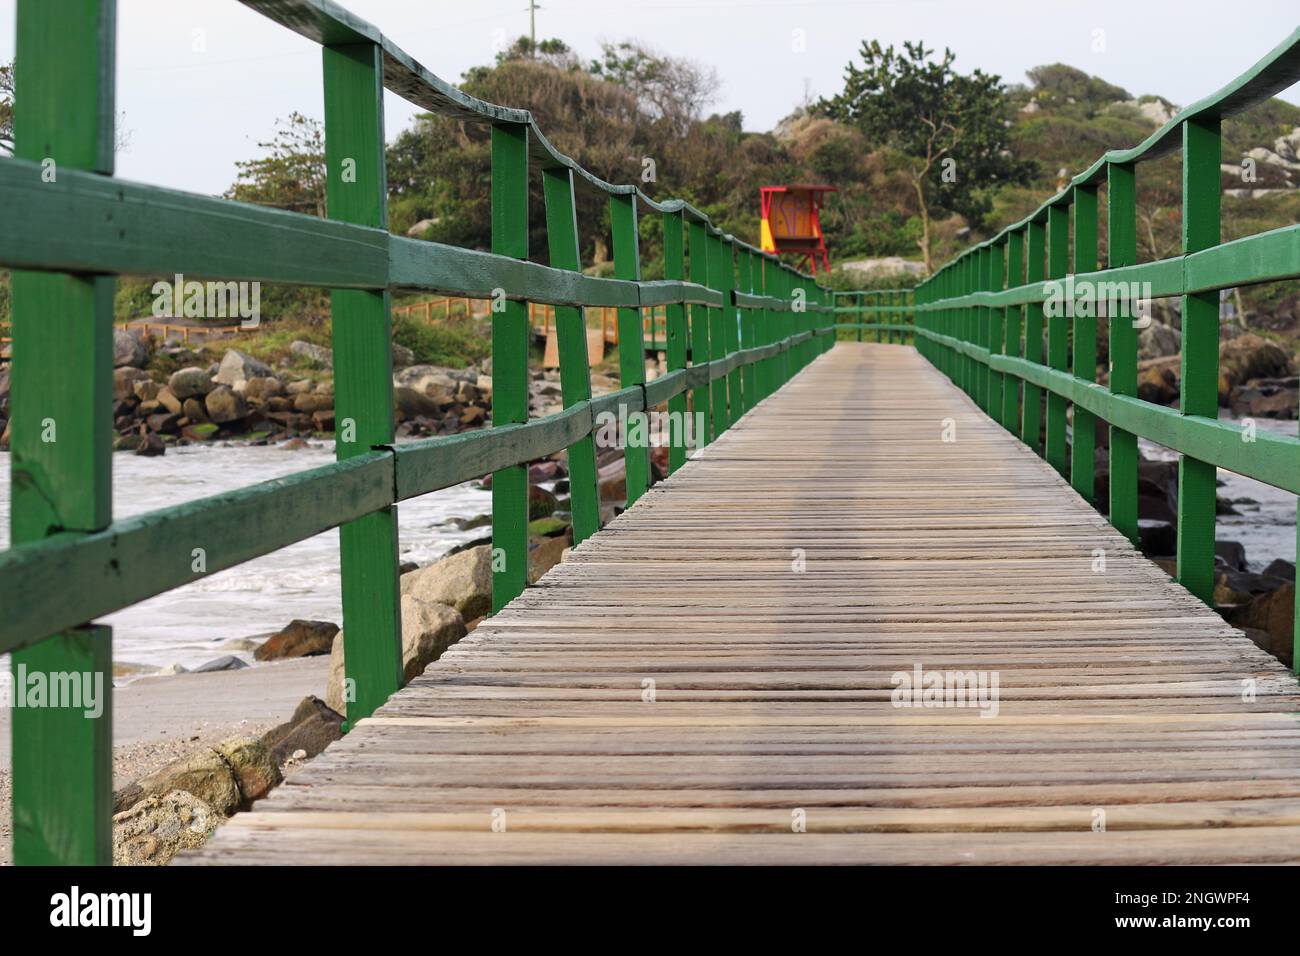 footbridge that joins the beach community to a small island. Construction made of wood, painted green. Stock Photo